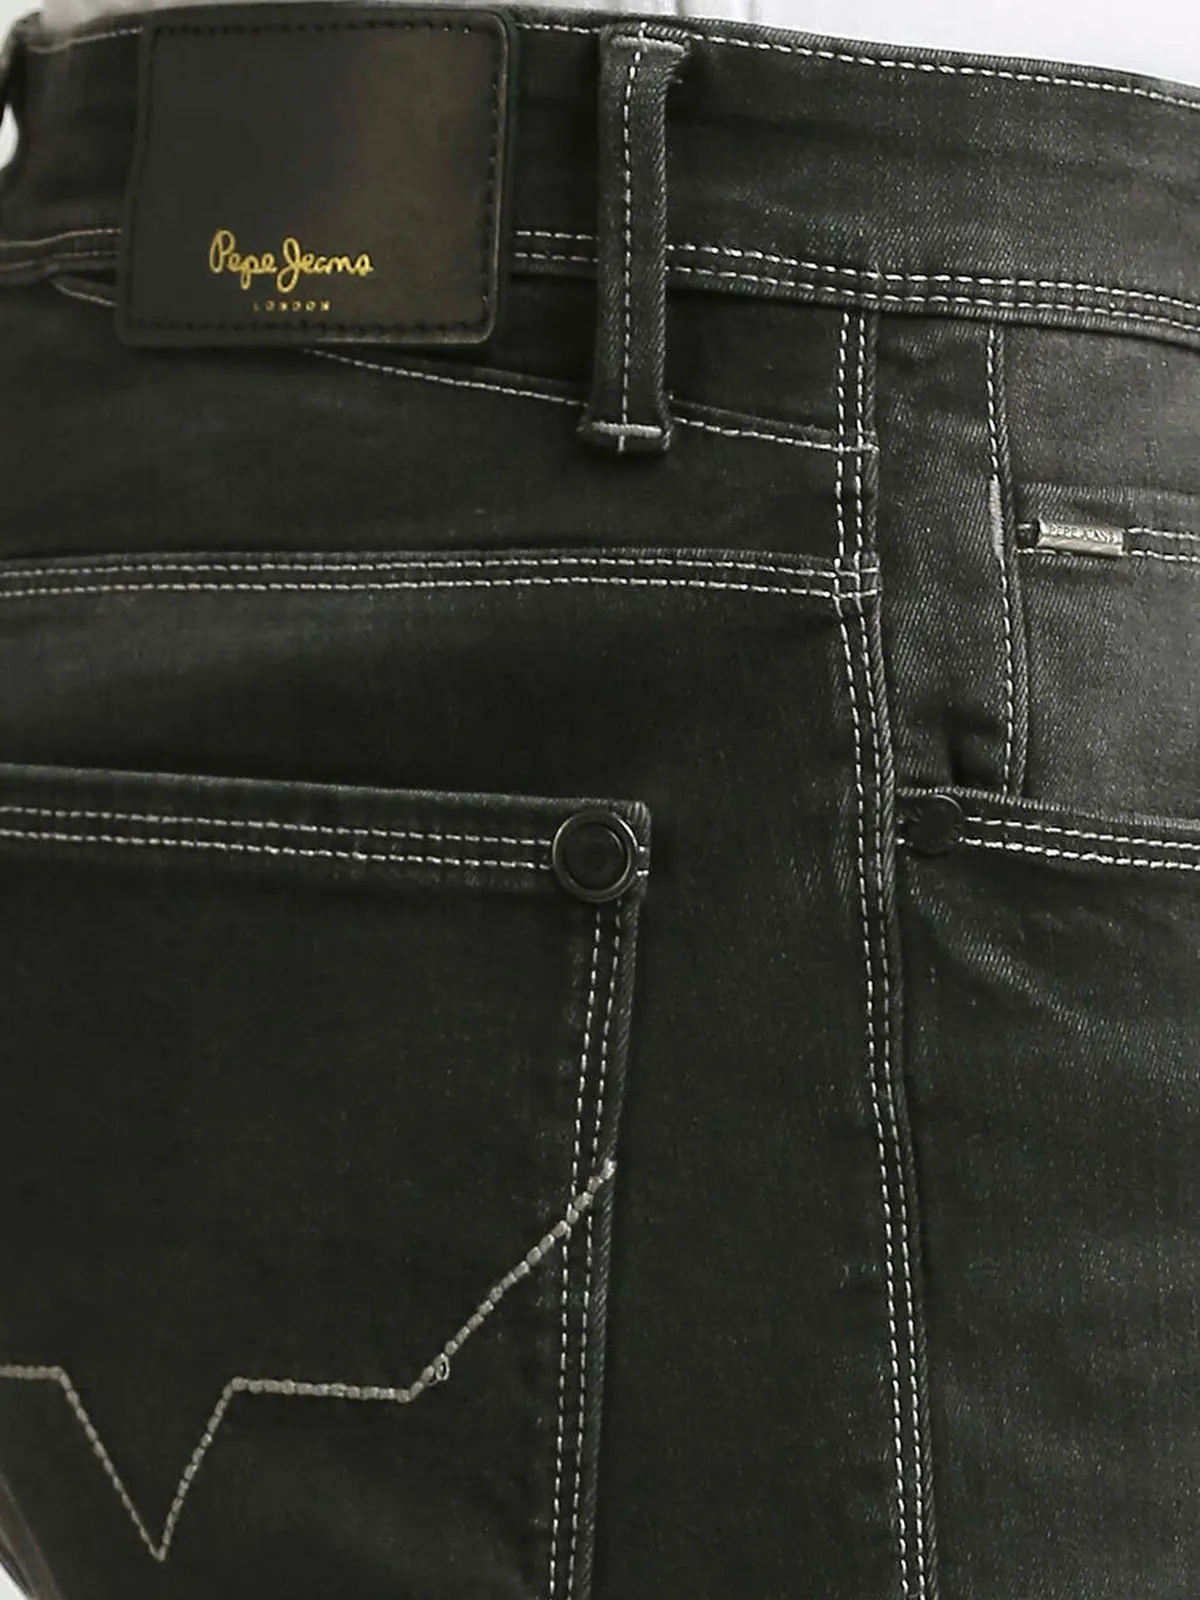 PEPE JEANS black washed straight fit jeans